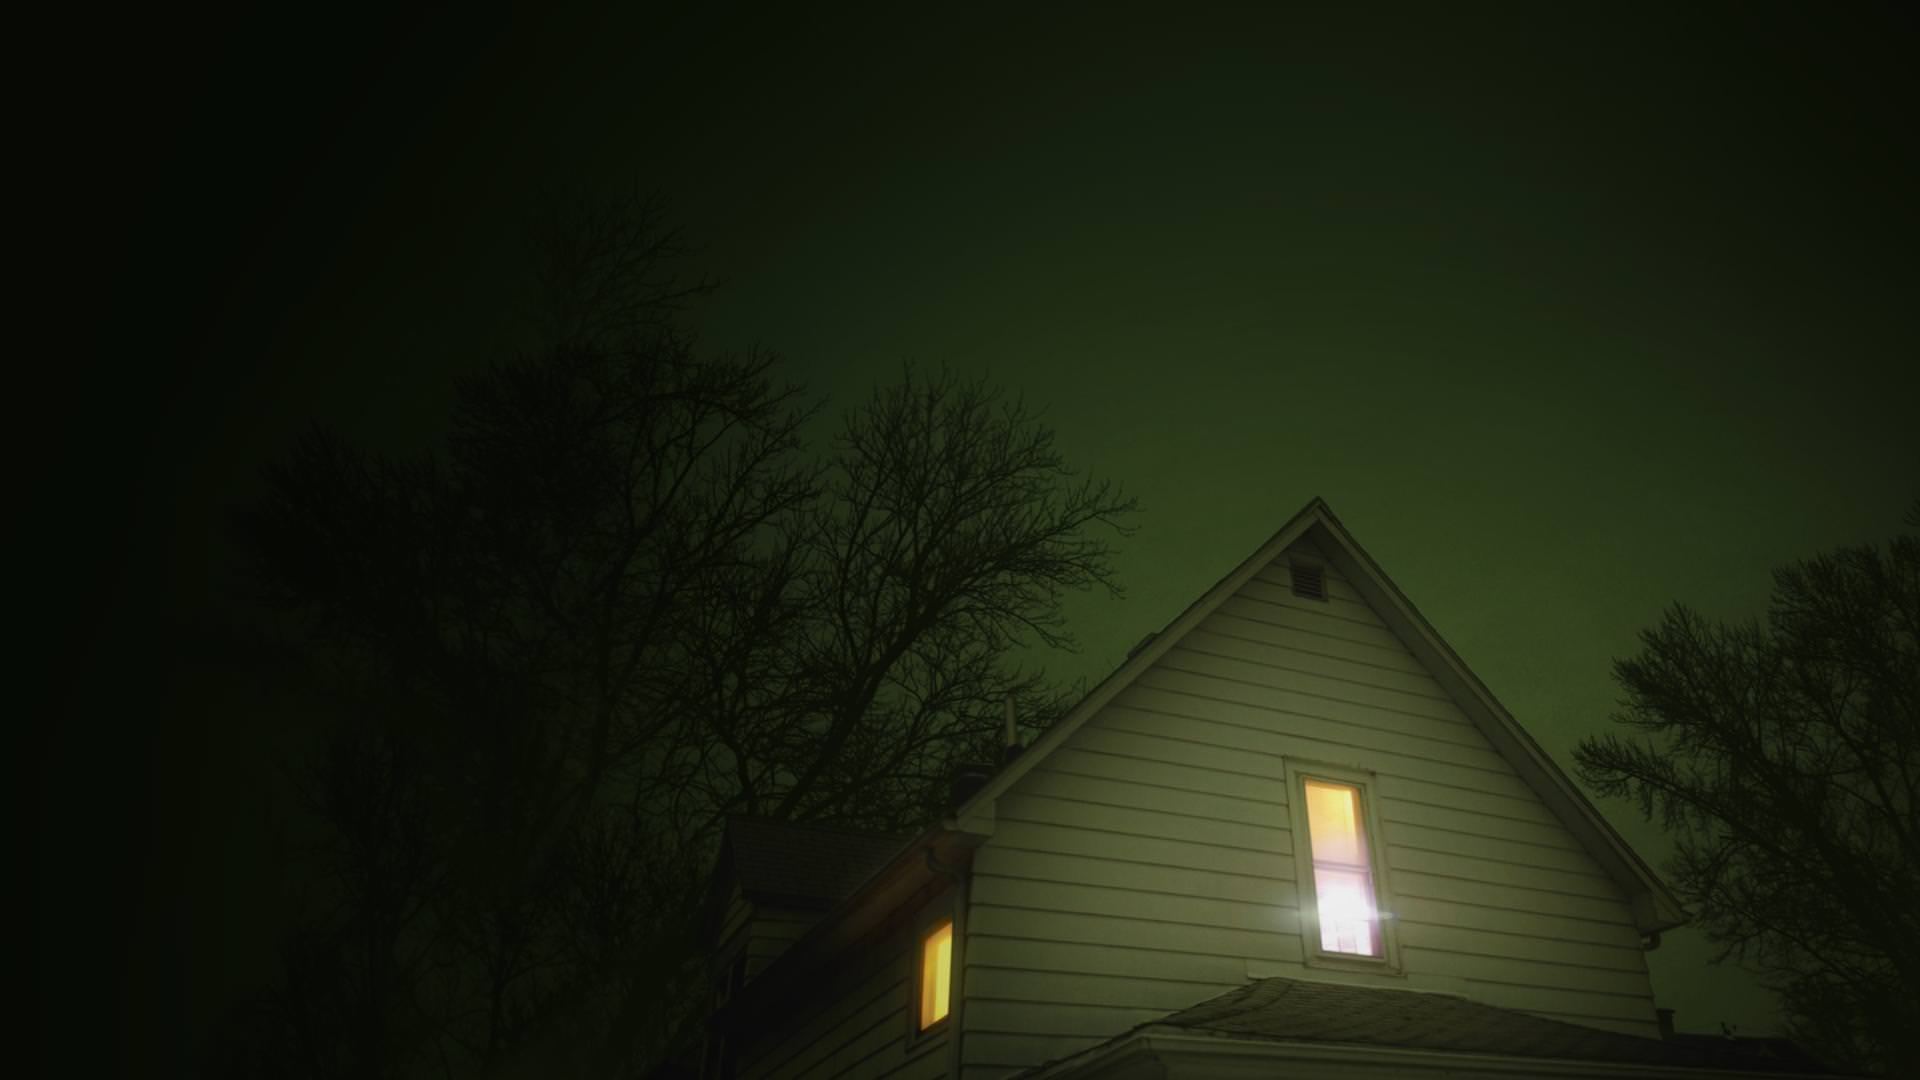 I made wallpaper of the American Football house